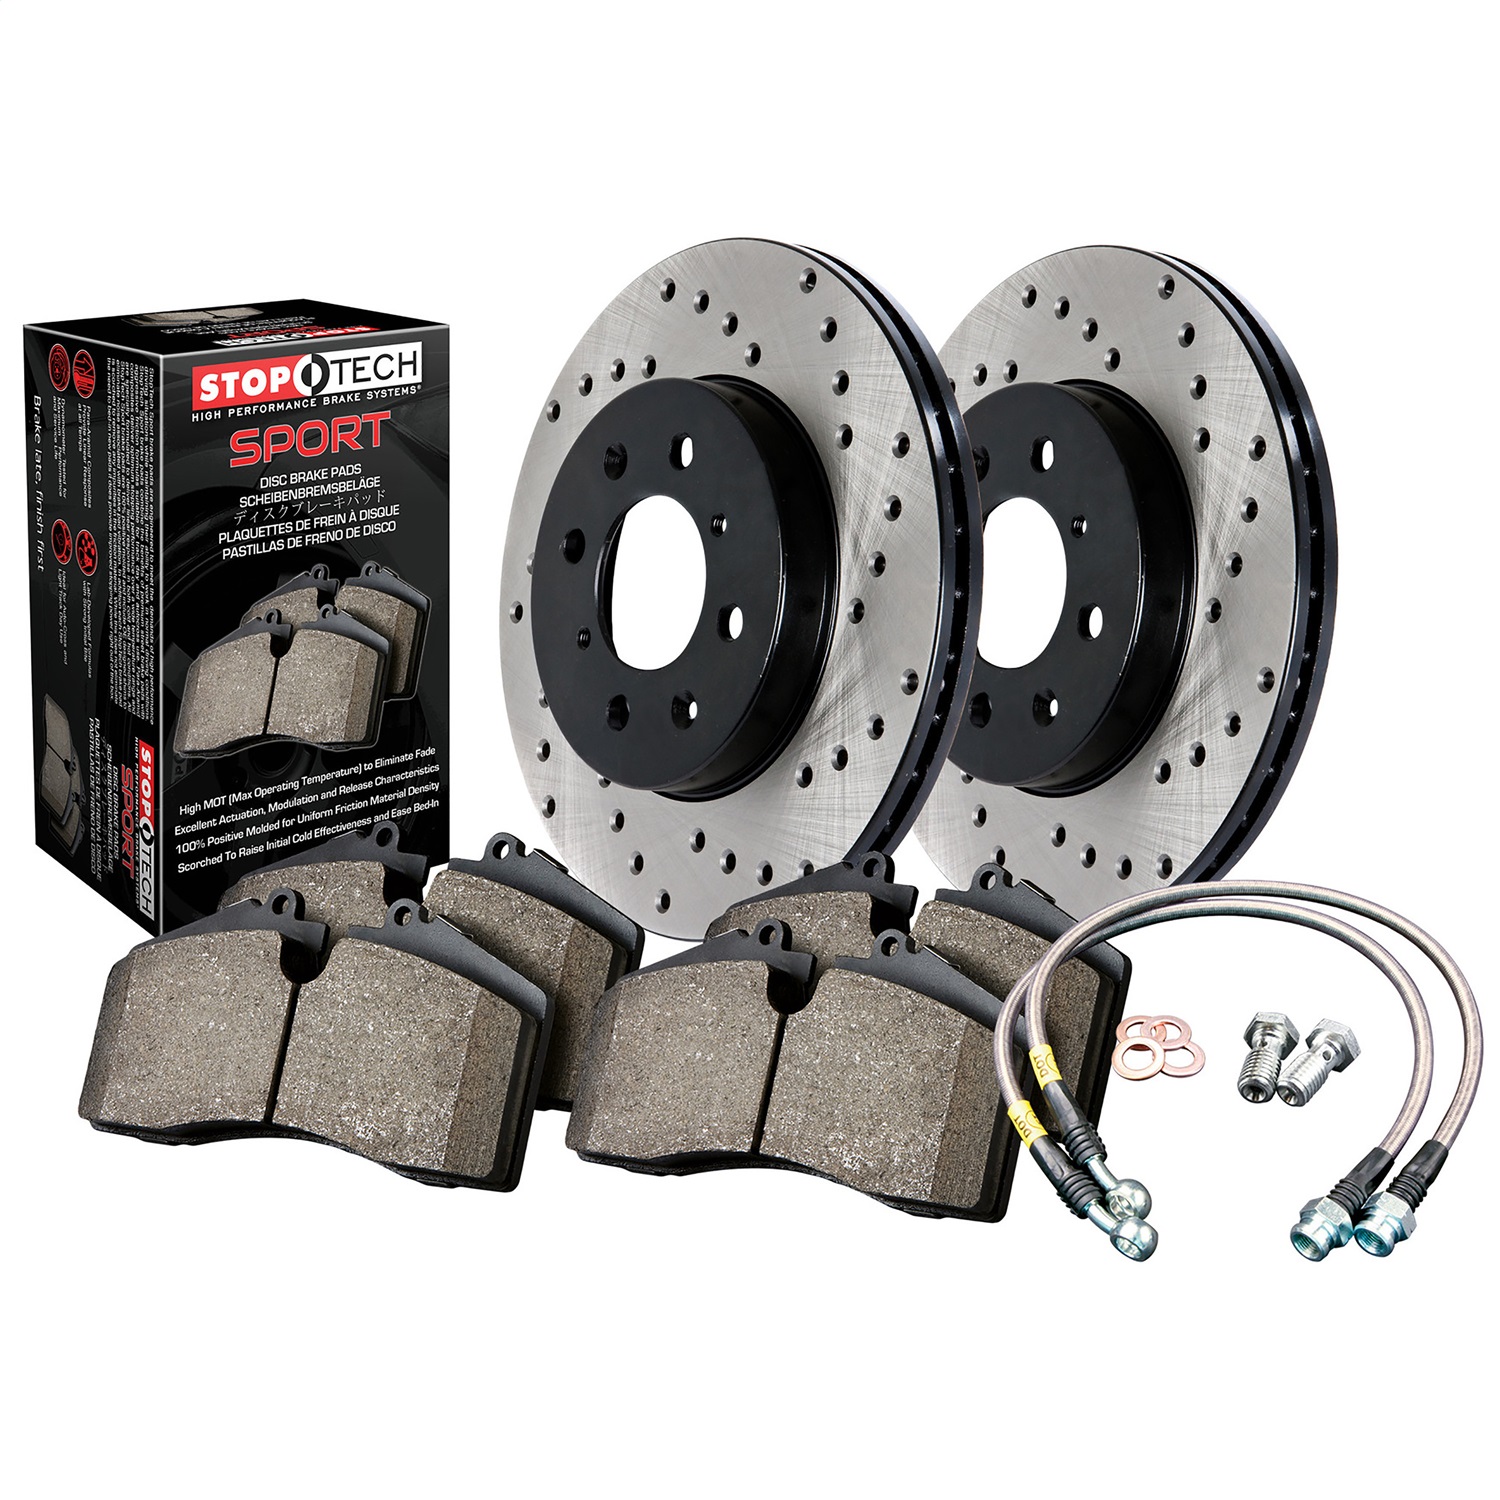 StopTech 979.40030F Sport Disc Brake Kit w/Cross-Drilled Rotors Fits Civic ILX